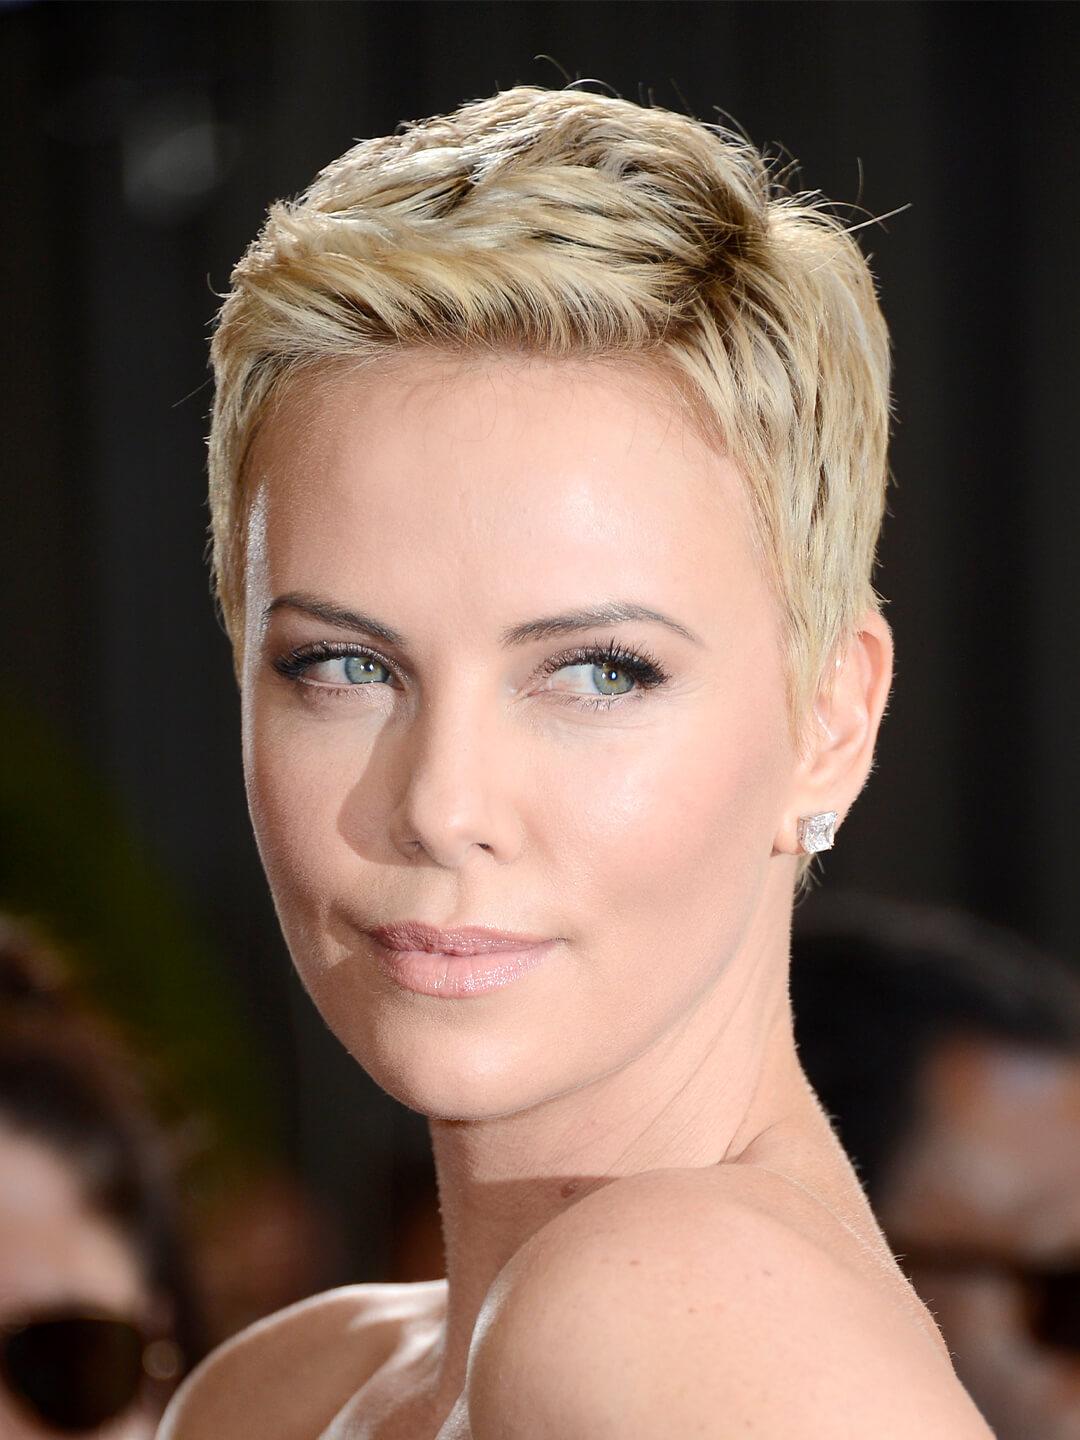 Charlize Theron rocking a texturized pixie cut hairstyle